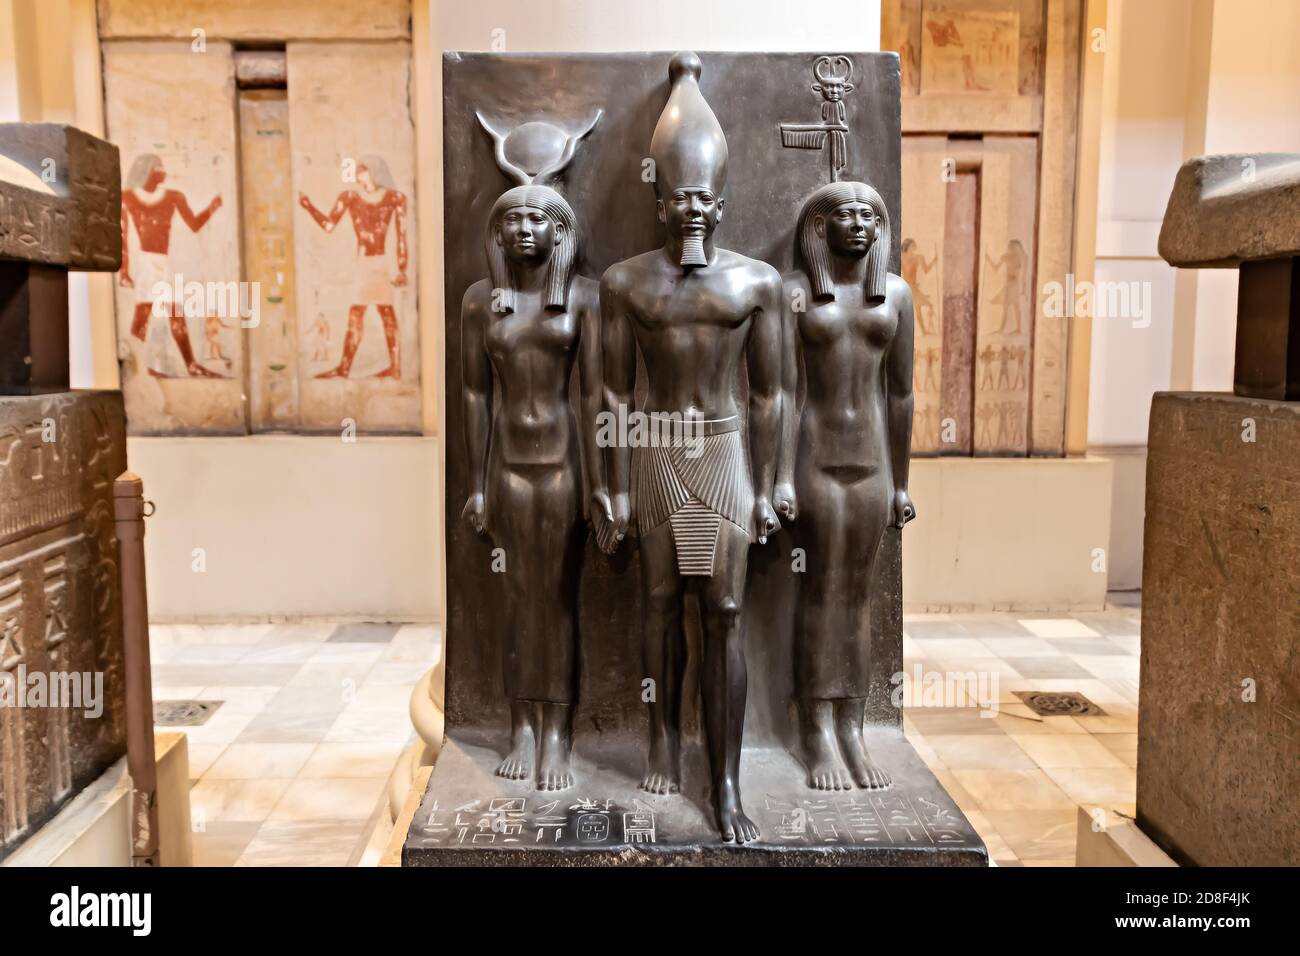 Cairo, Egypt - September 15, 2018: Statues of gods inside of the Museum of Egyptian Antiquities Stock Photo